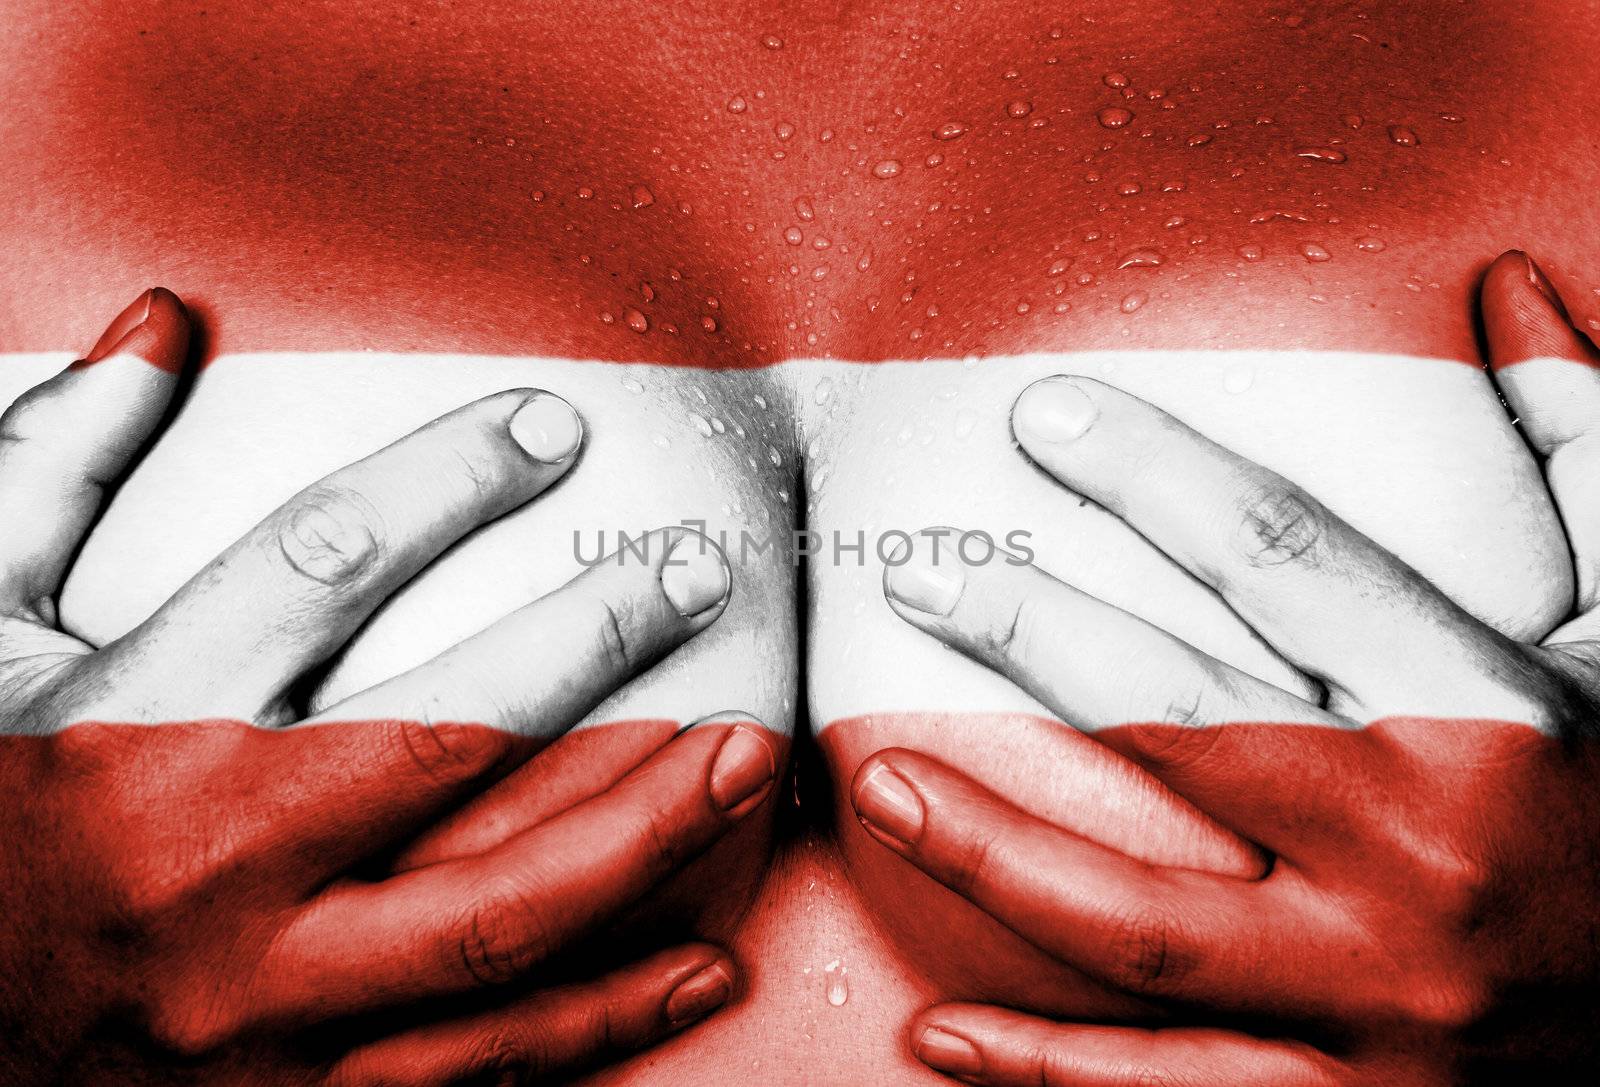 Sweaty upper part of female body, hands covering breasts, flag of Austria